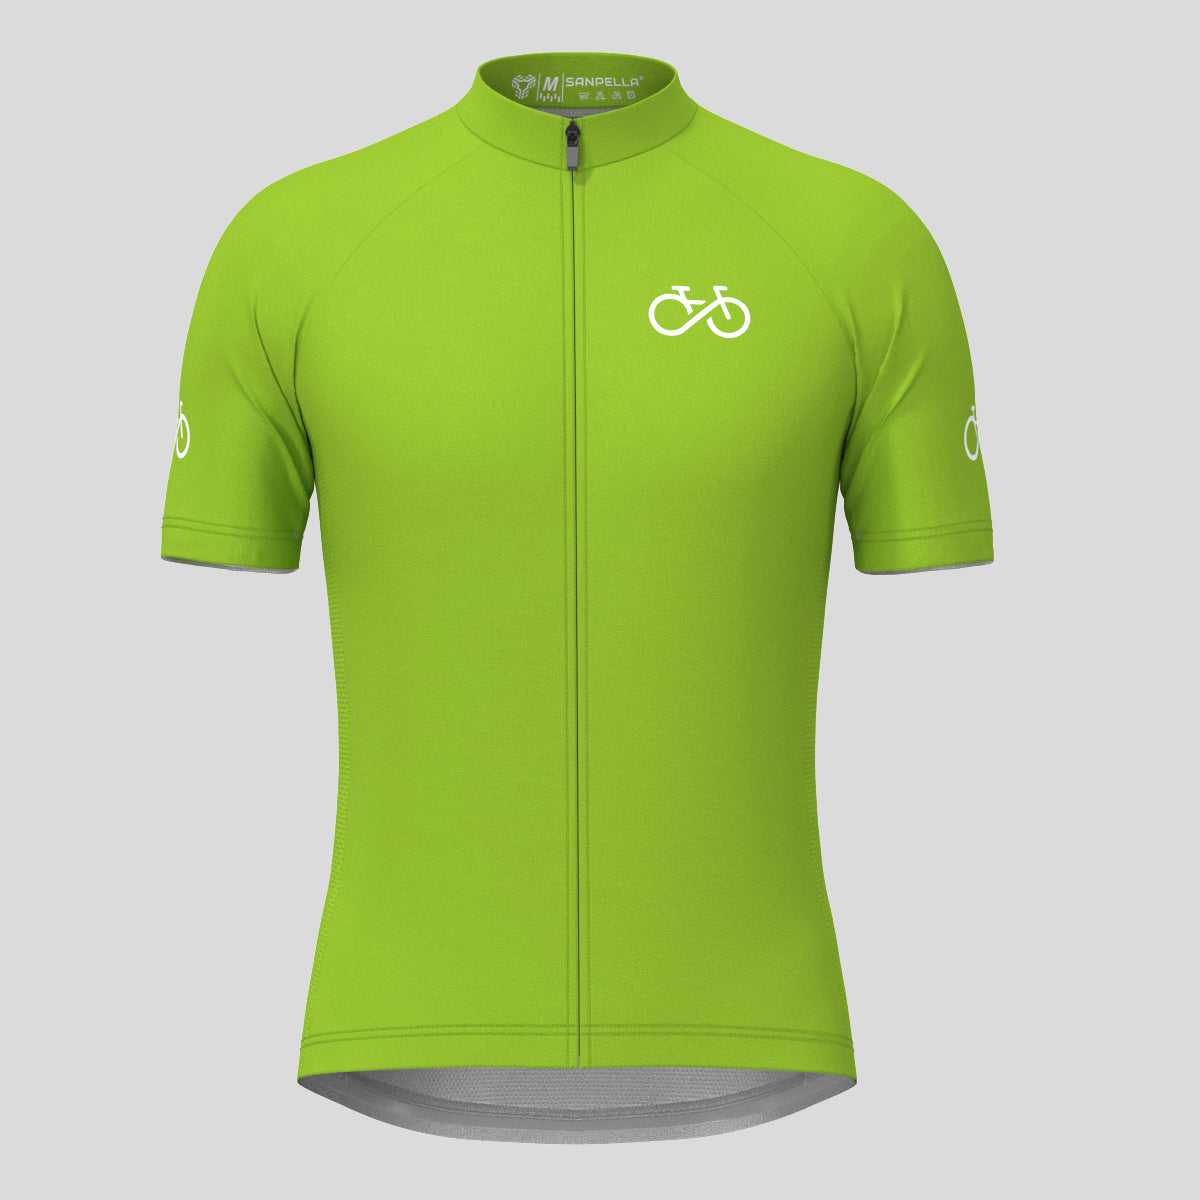 Ride Forever Men's Cycling Jersey -Wasabi